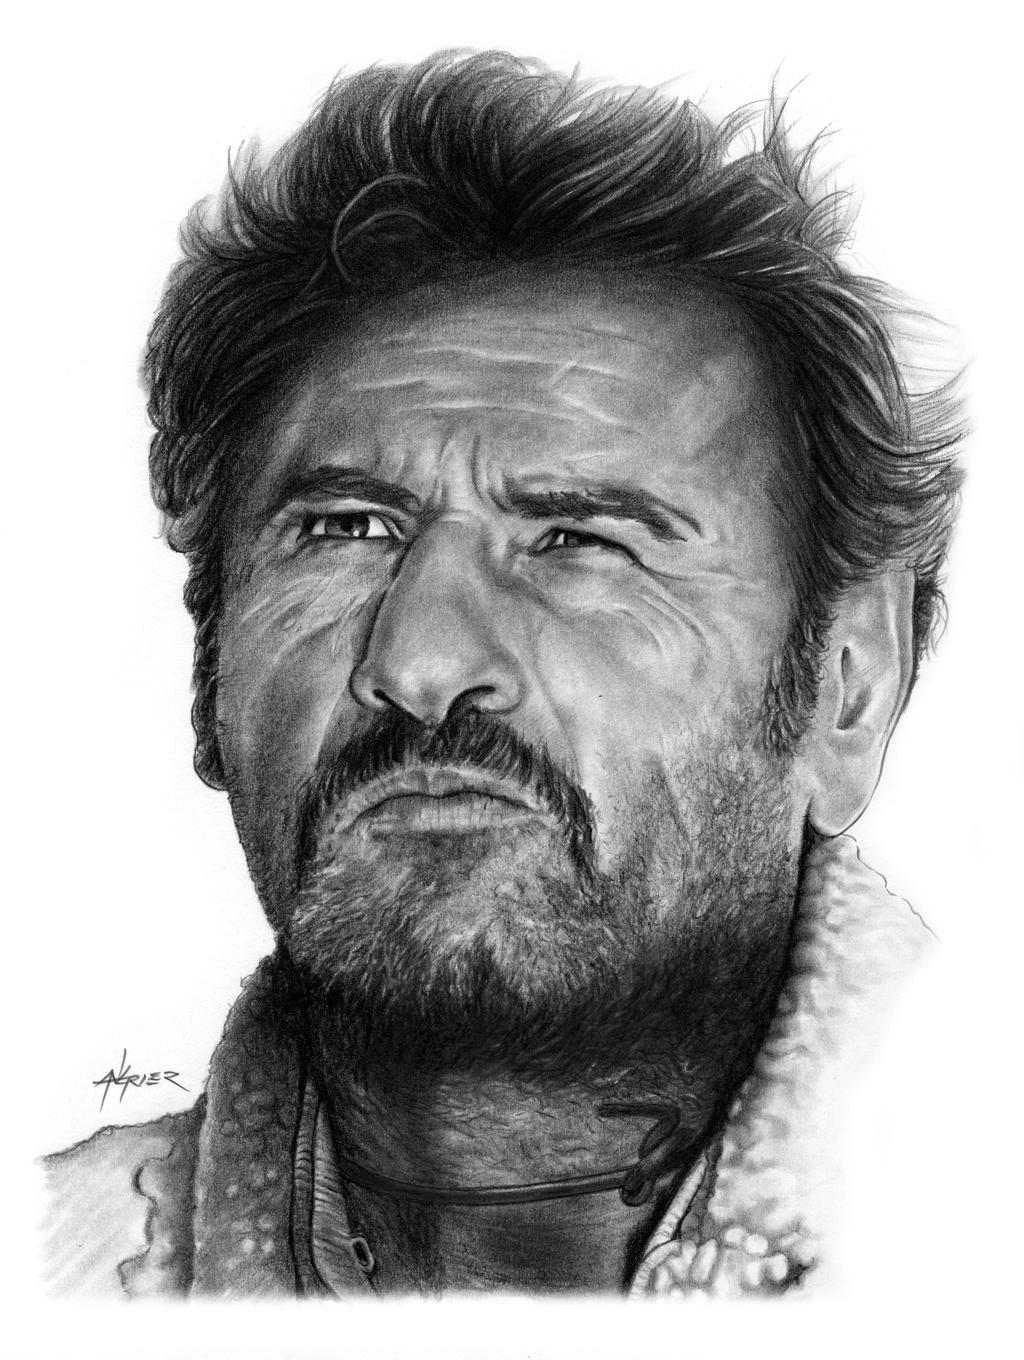 the Ugly, Eli Wallach by ajgrier on DeviantArt